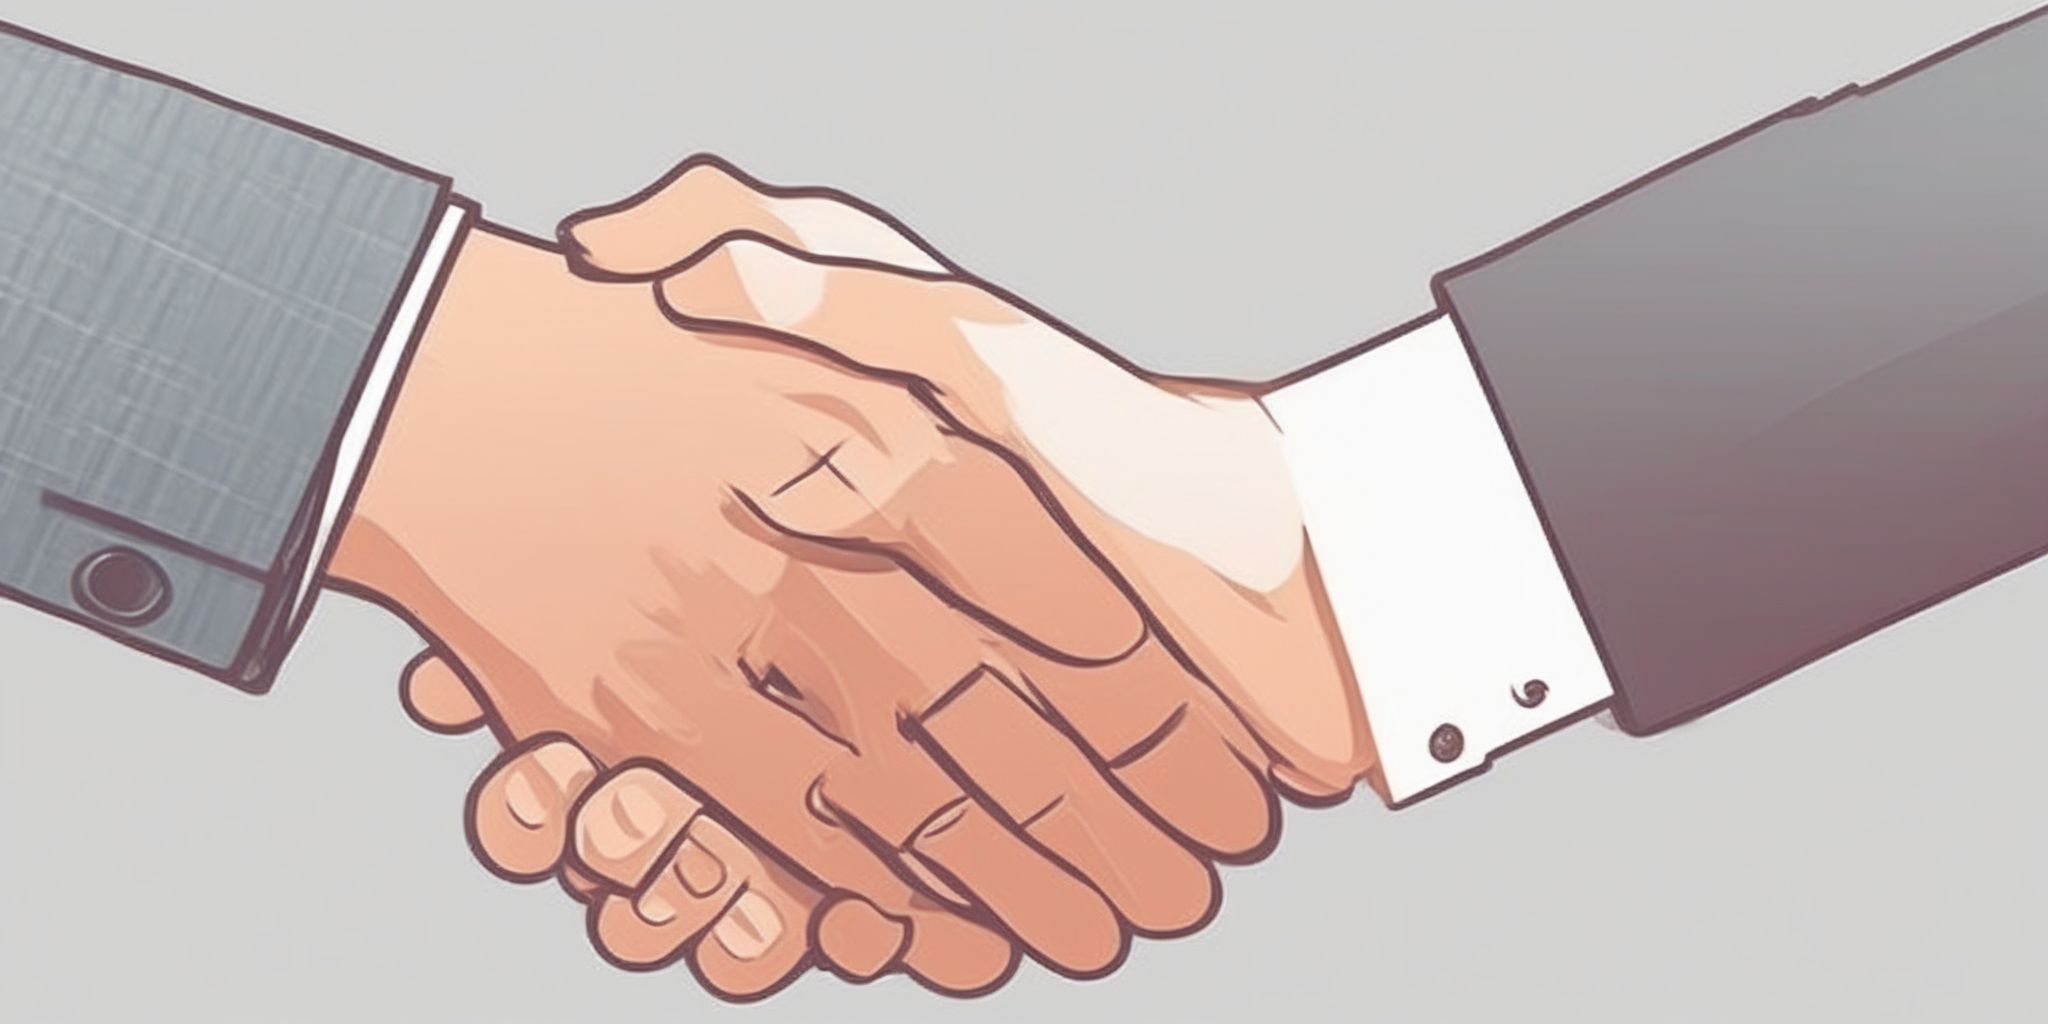 Handshake in illustration style with gradients and white background